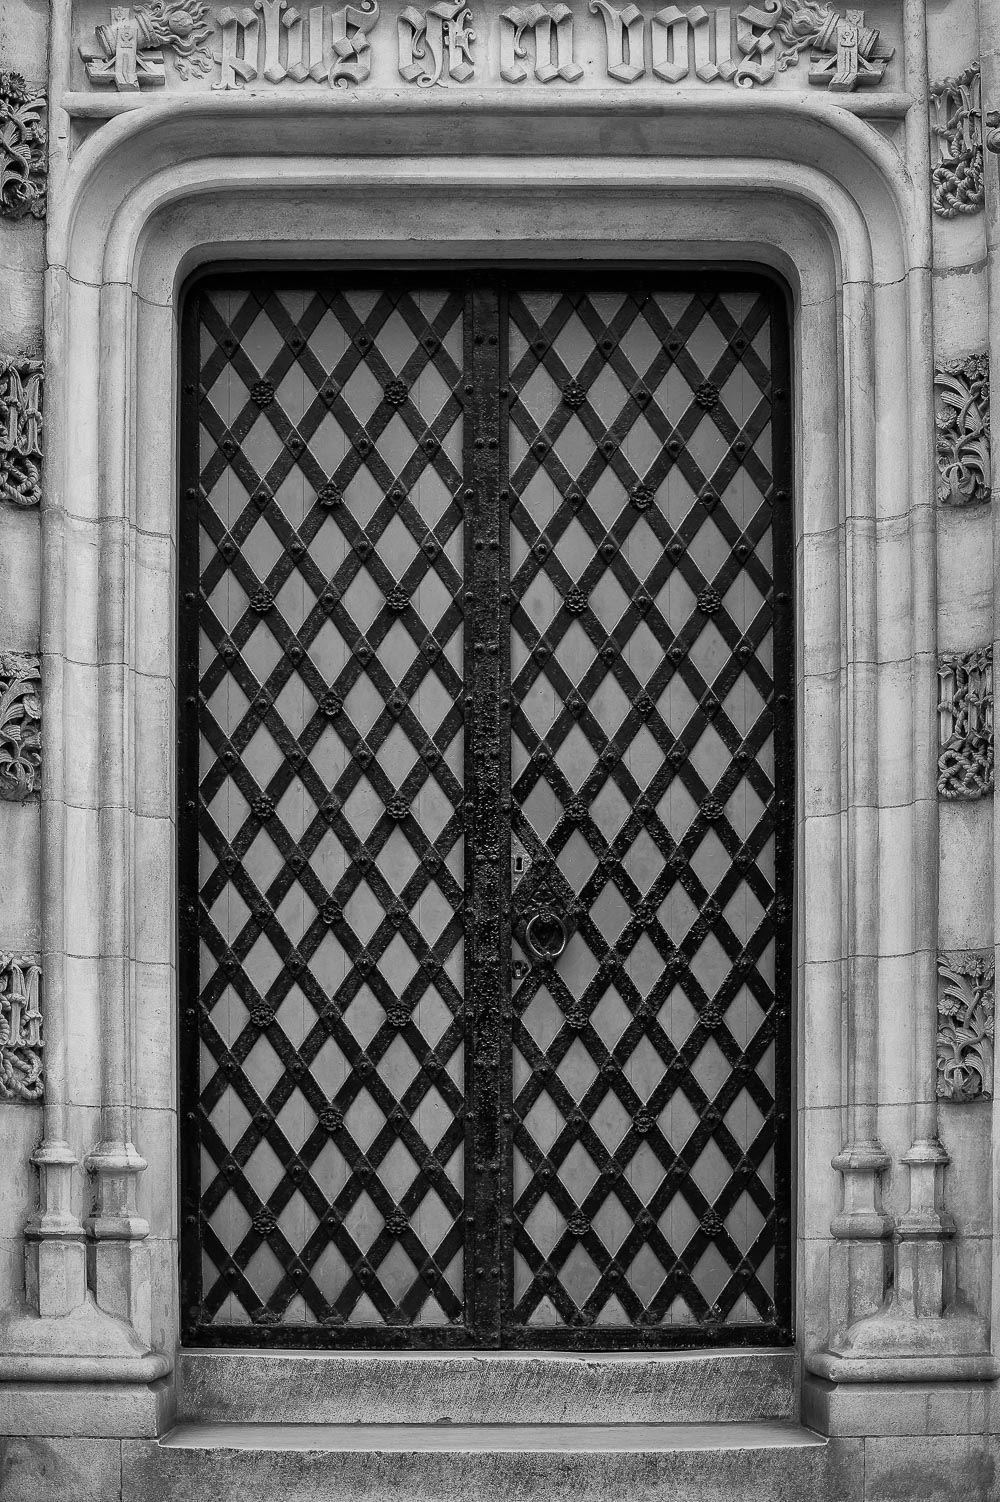 A  metal and wood lattice door  framed by stone speaks to the  rich history  of  Bruges  in  Belgium .